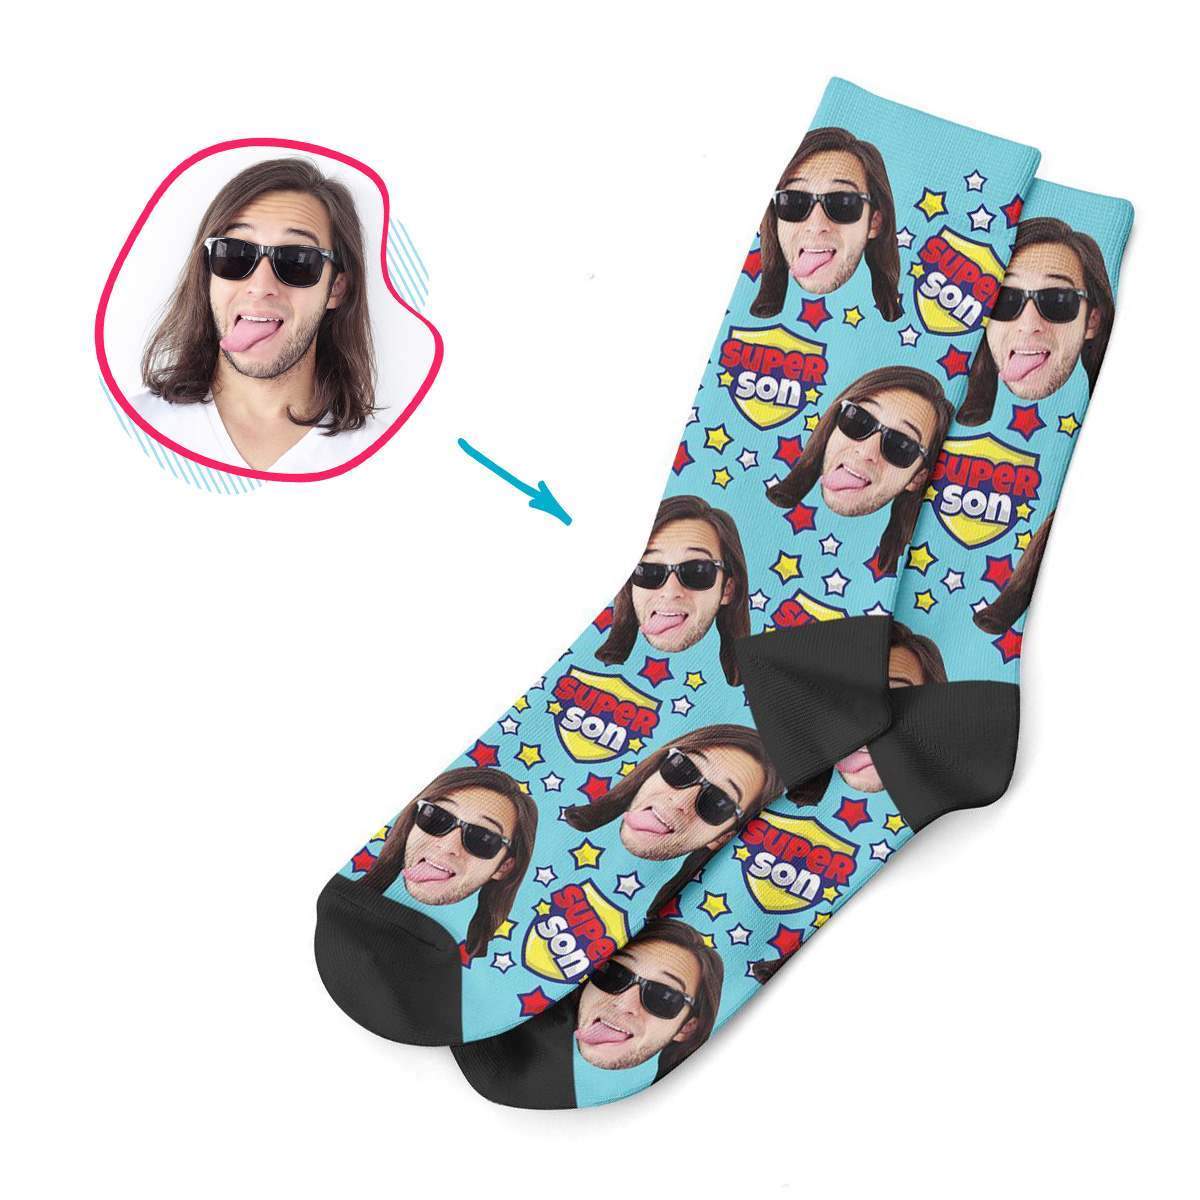 blue Super Son socks personalized with photo of face printed on them